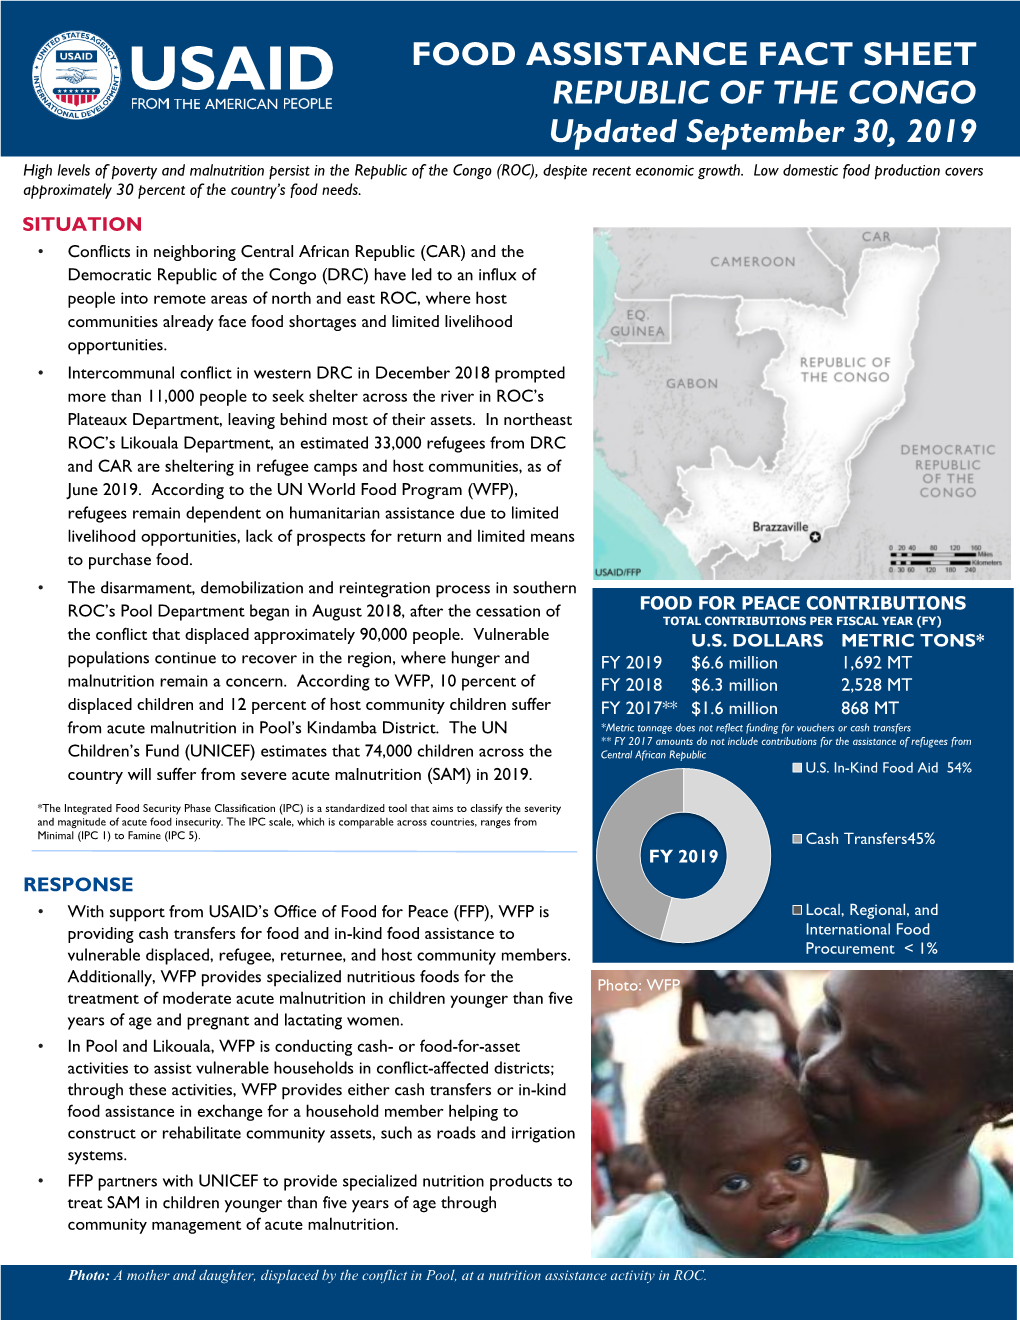 FOOD ASSISTANCE FACT SHEET REPUBLIC of the CONGO Updated September 30, 2019